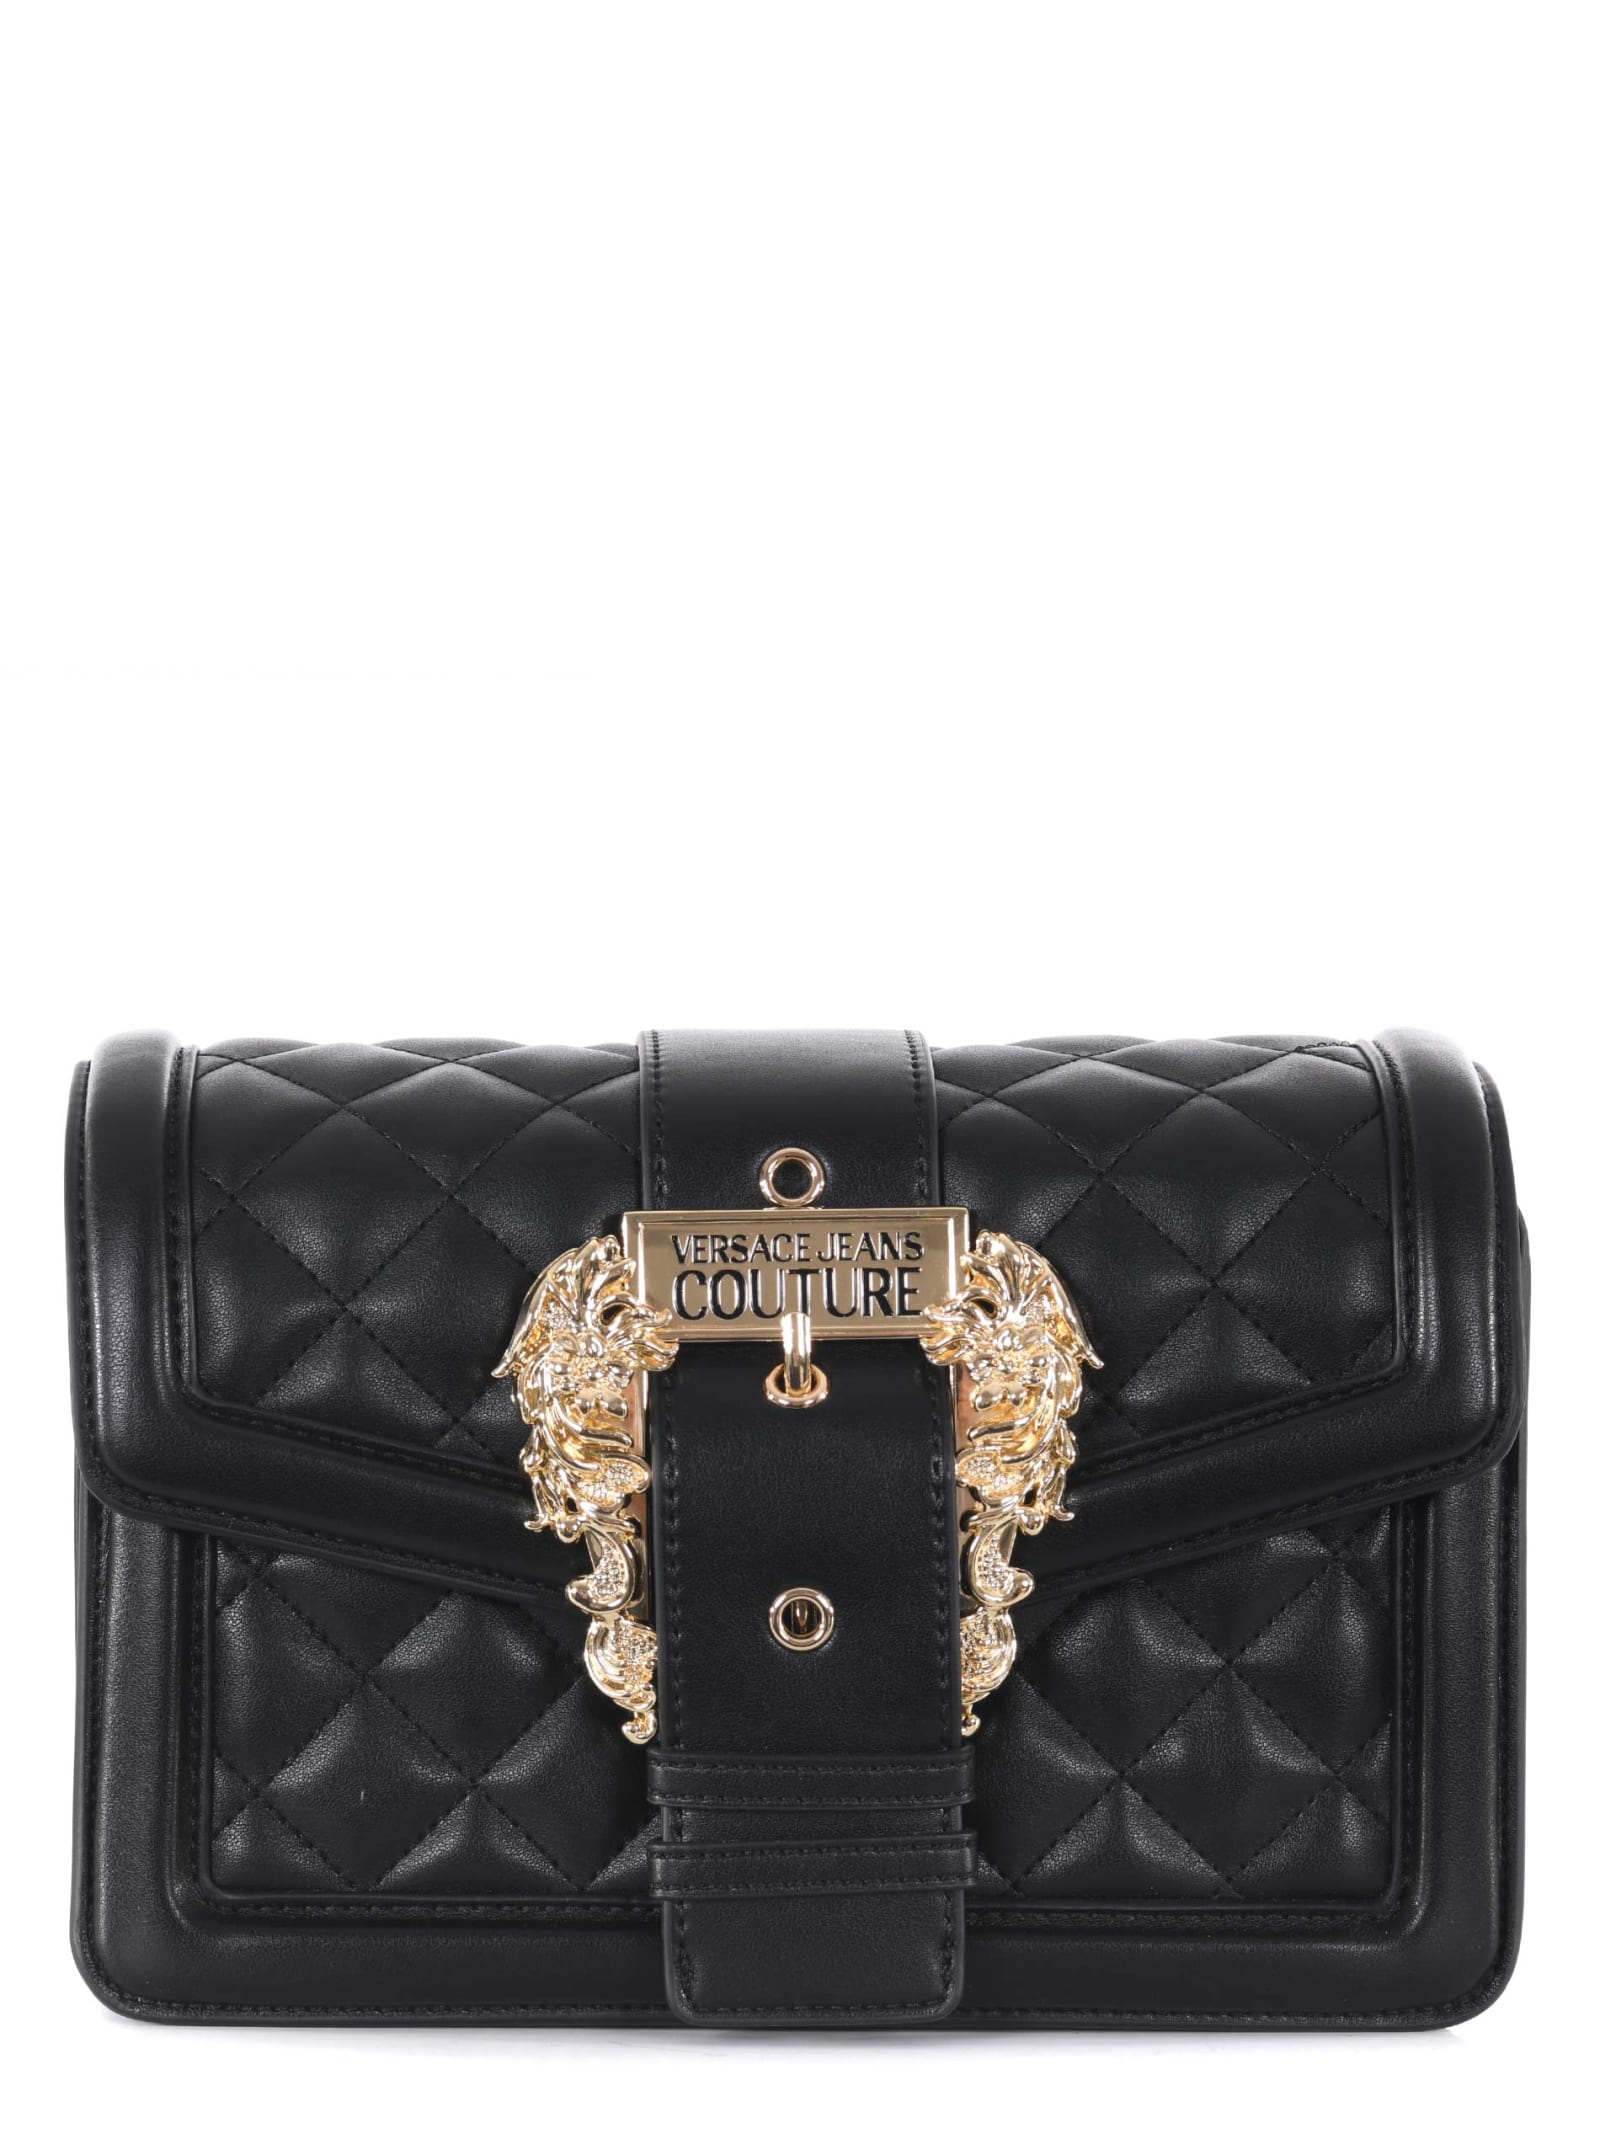 Versace Jeans Couture Quilted Eco-leather Bag